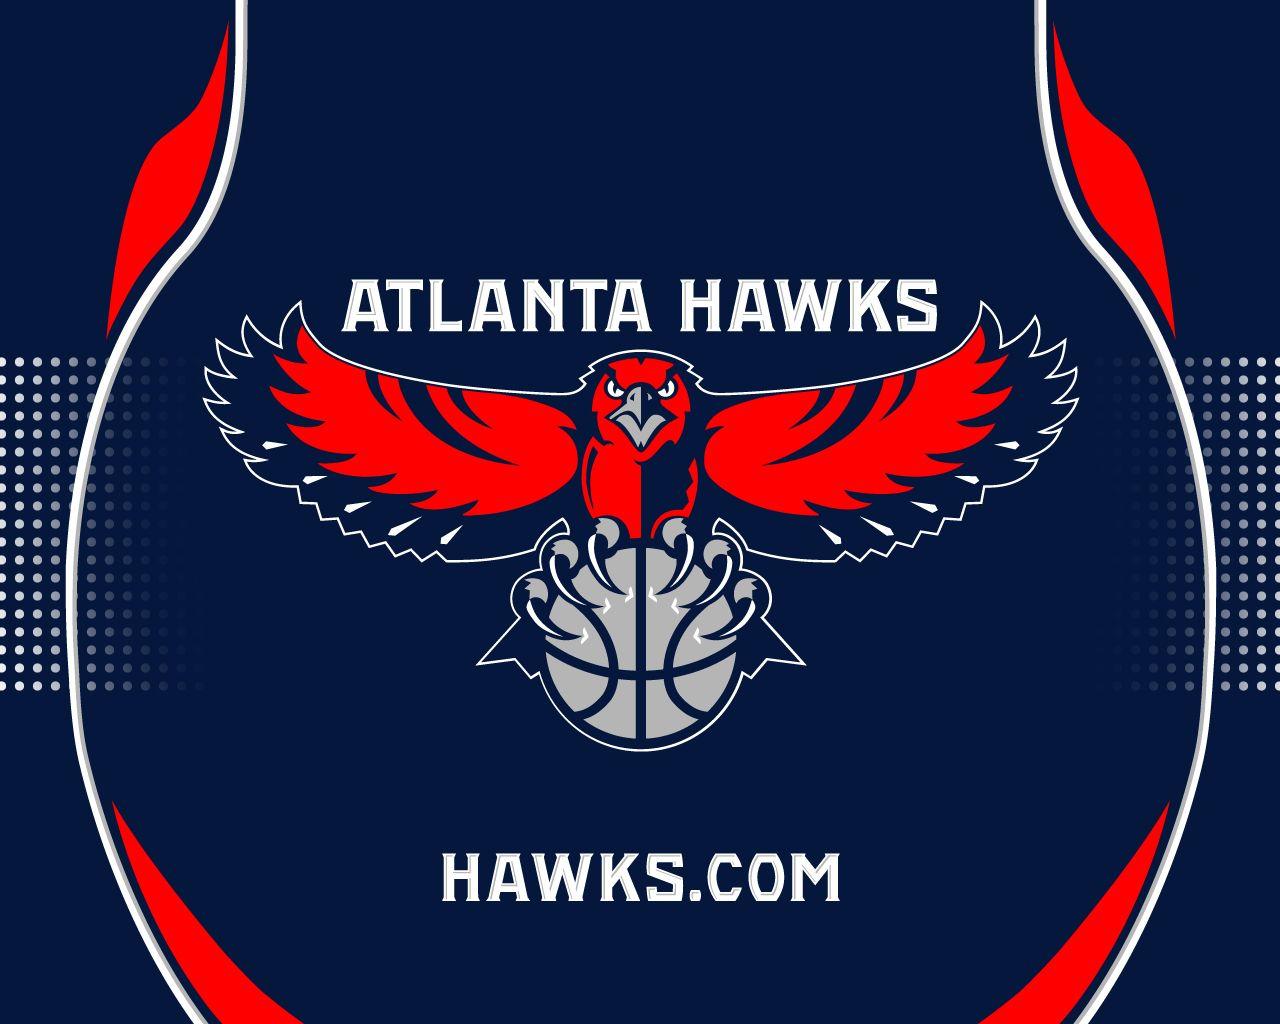 Download wallpapers Atlanta Hawks flag 4k red and black 3D waves NBA  american basketball team Atlanta Hawks logo basketball Atlanta Hawks for  desktop free Pictures for desktop free